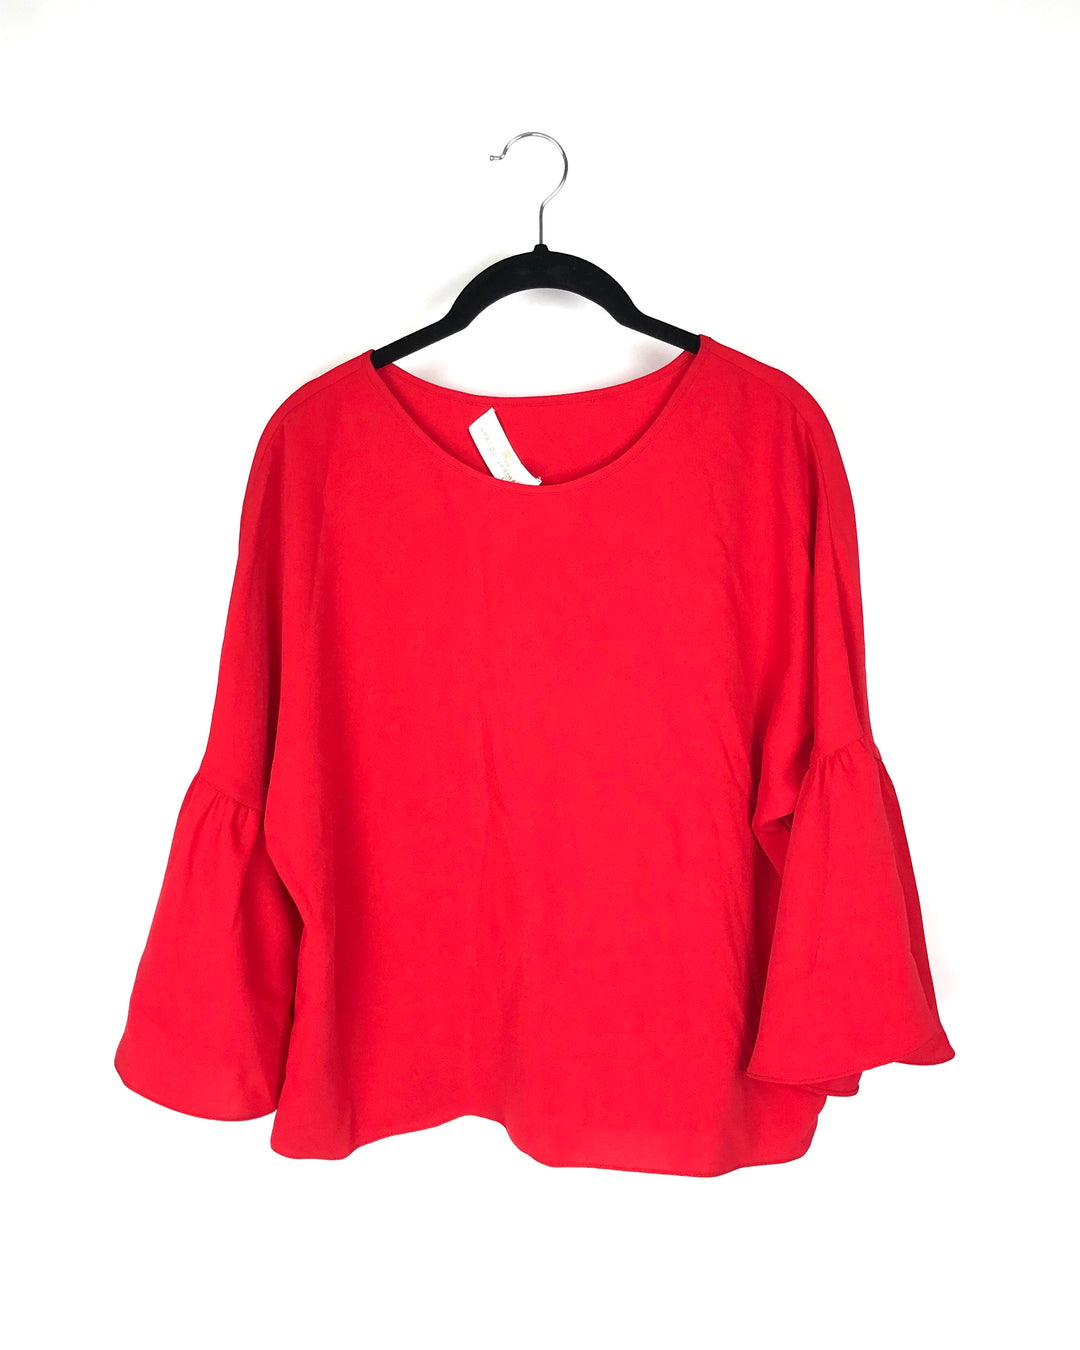 Bright Red Top - Small